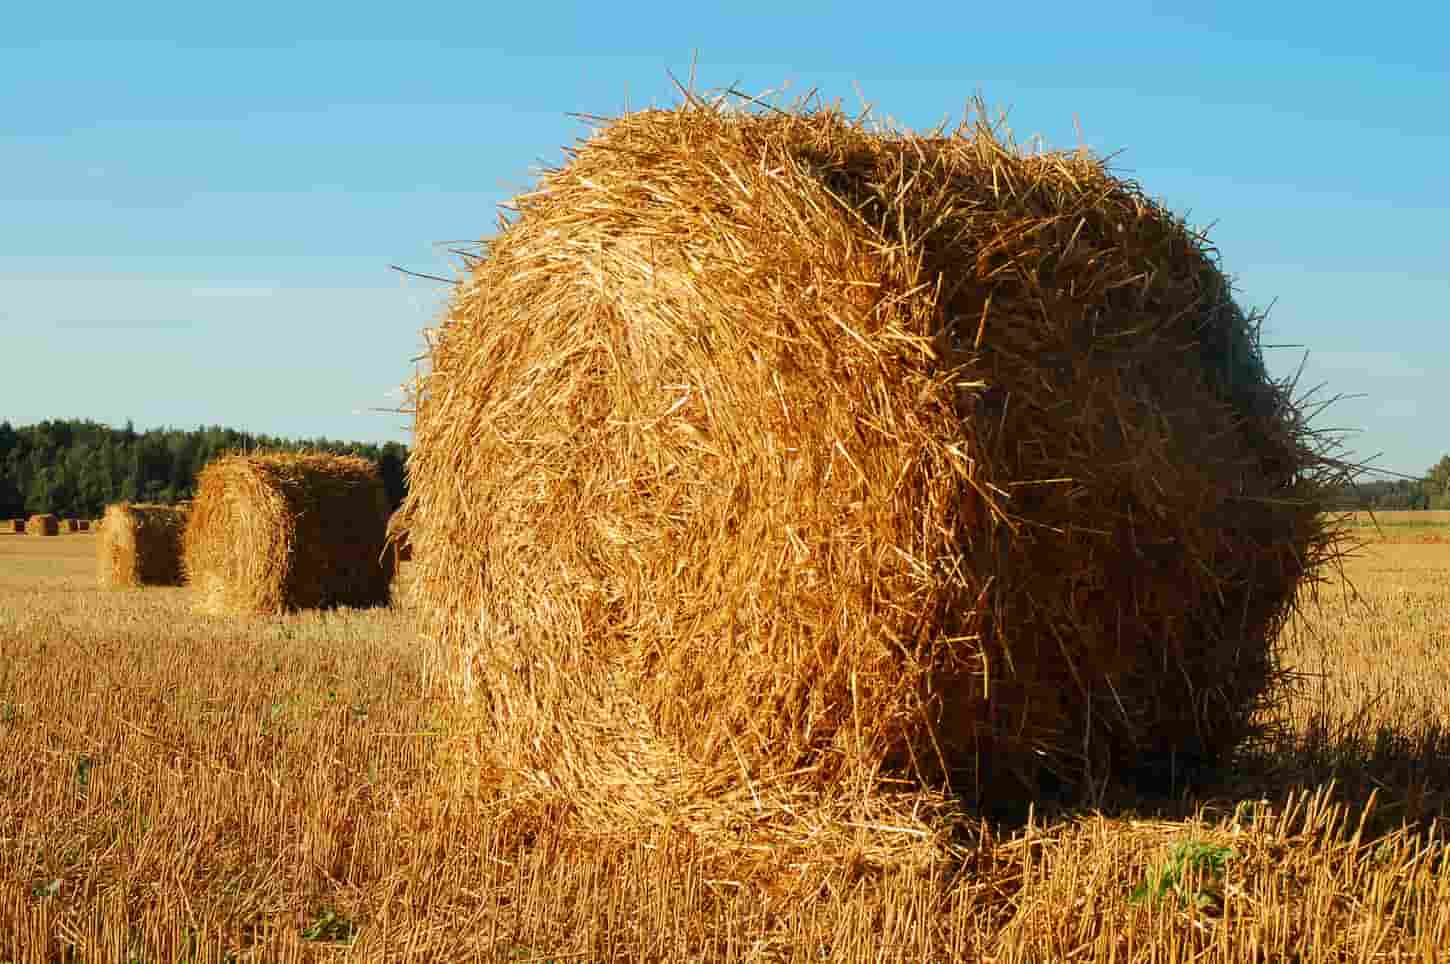 An image of alfalfa hay in the field.